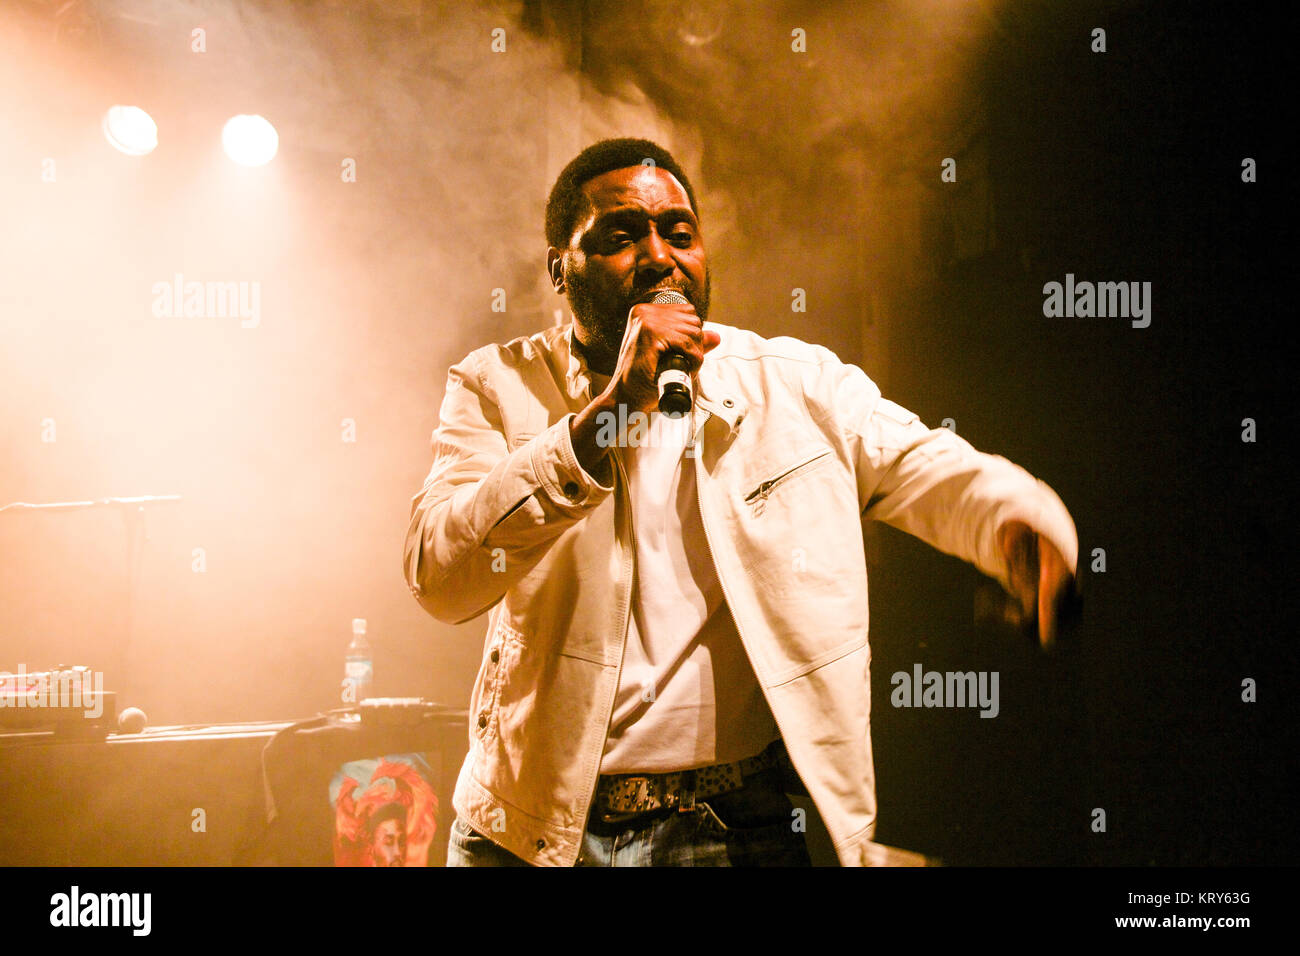 Big Daddy Kane - Agent, Manager, Publicist Contact Info